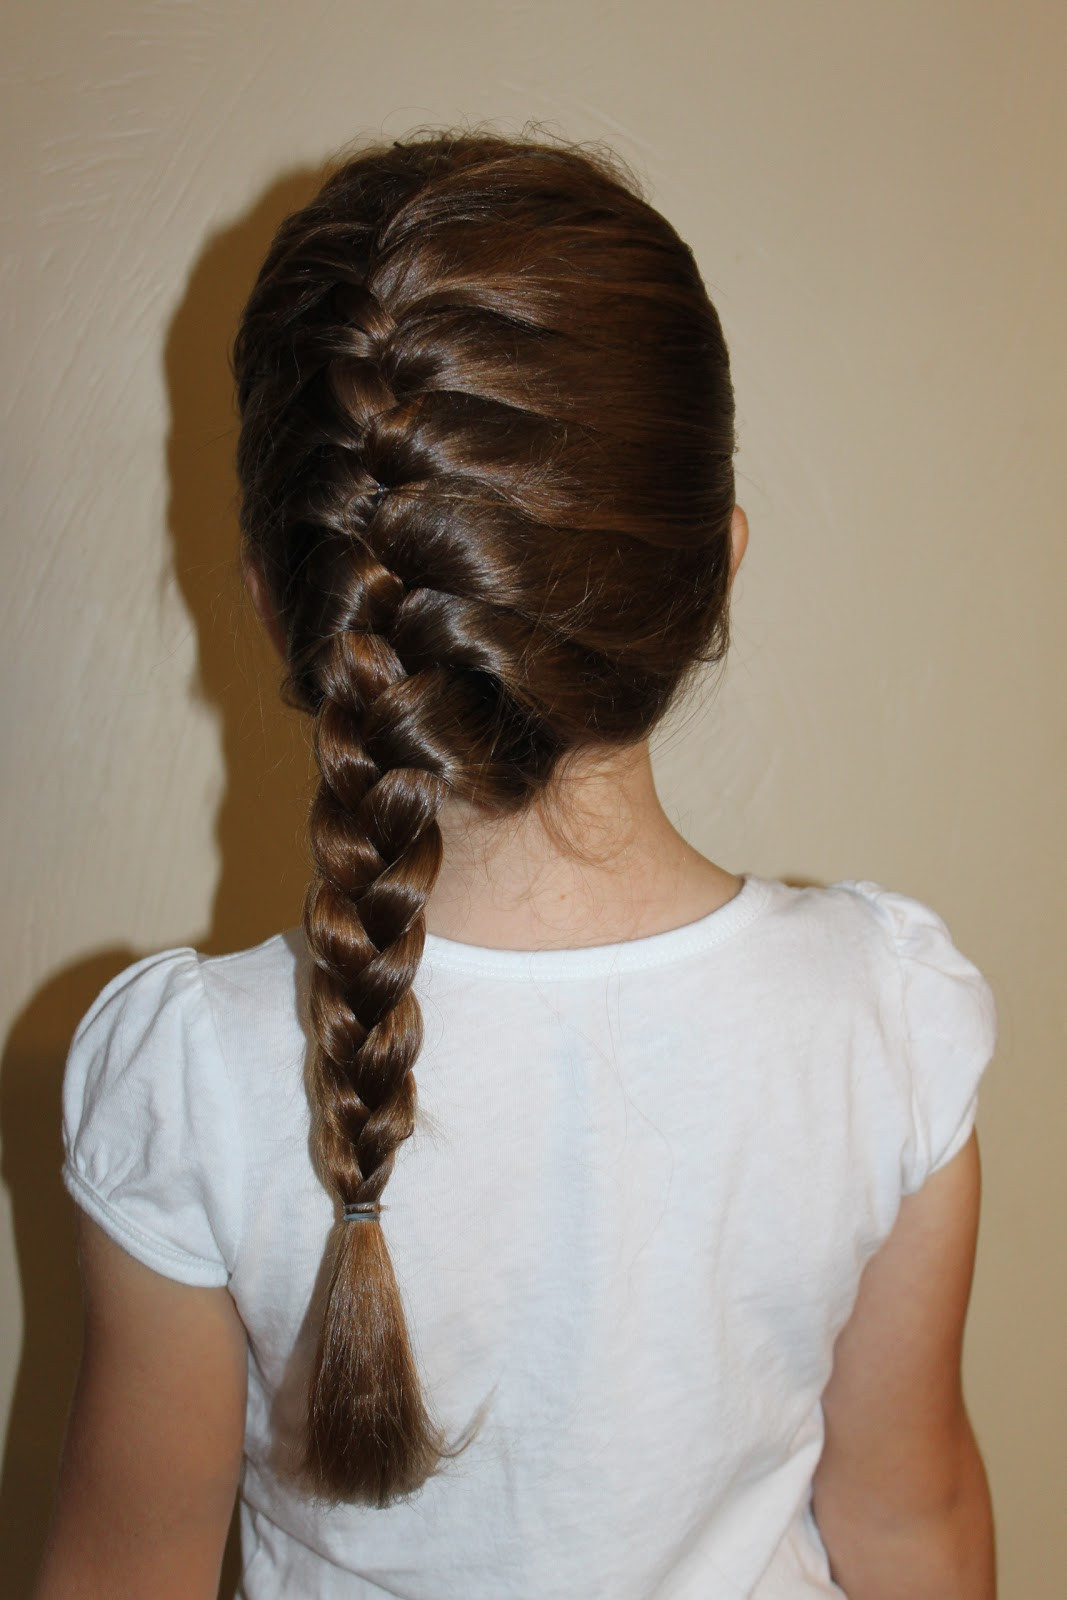 Top Braid Hairstyles
 Hairstyles for Girls The Wright Hair Side French Braid